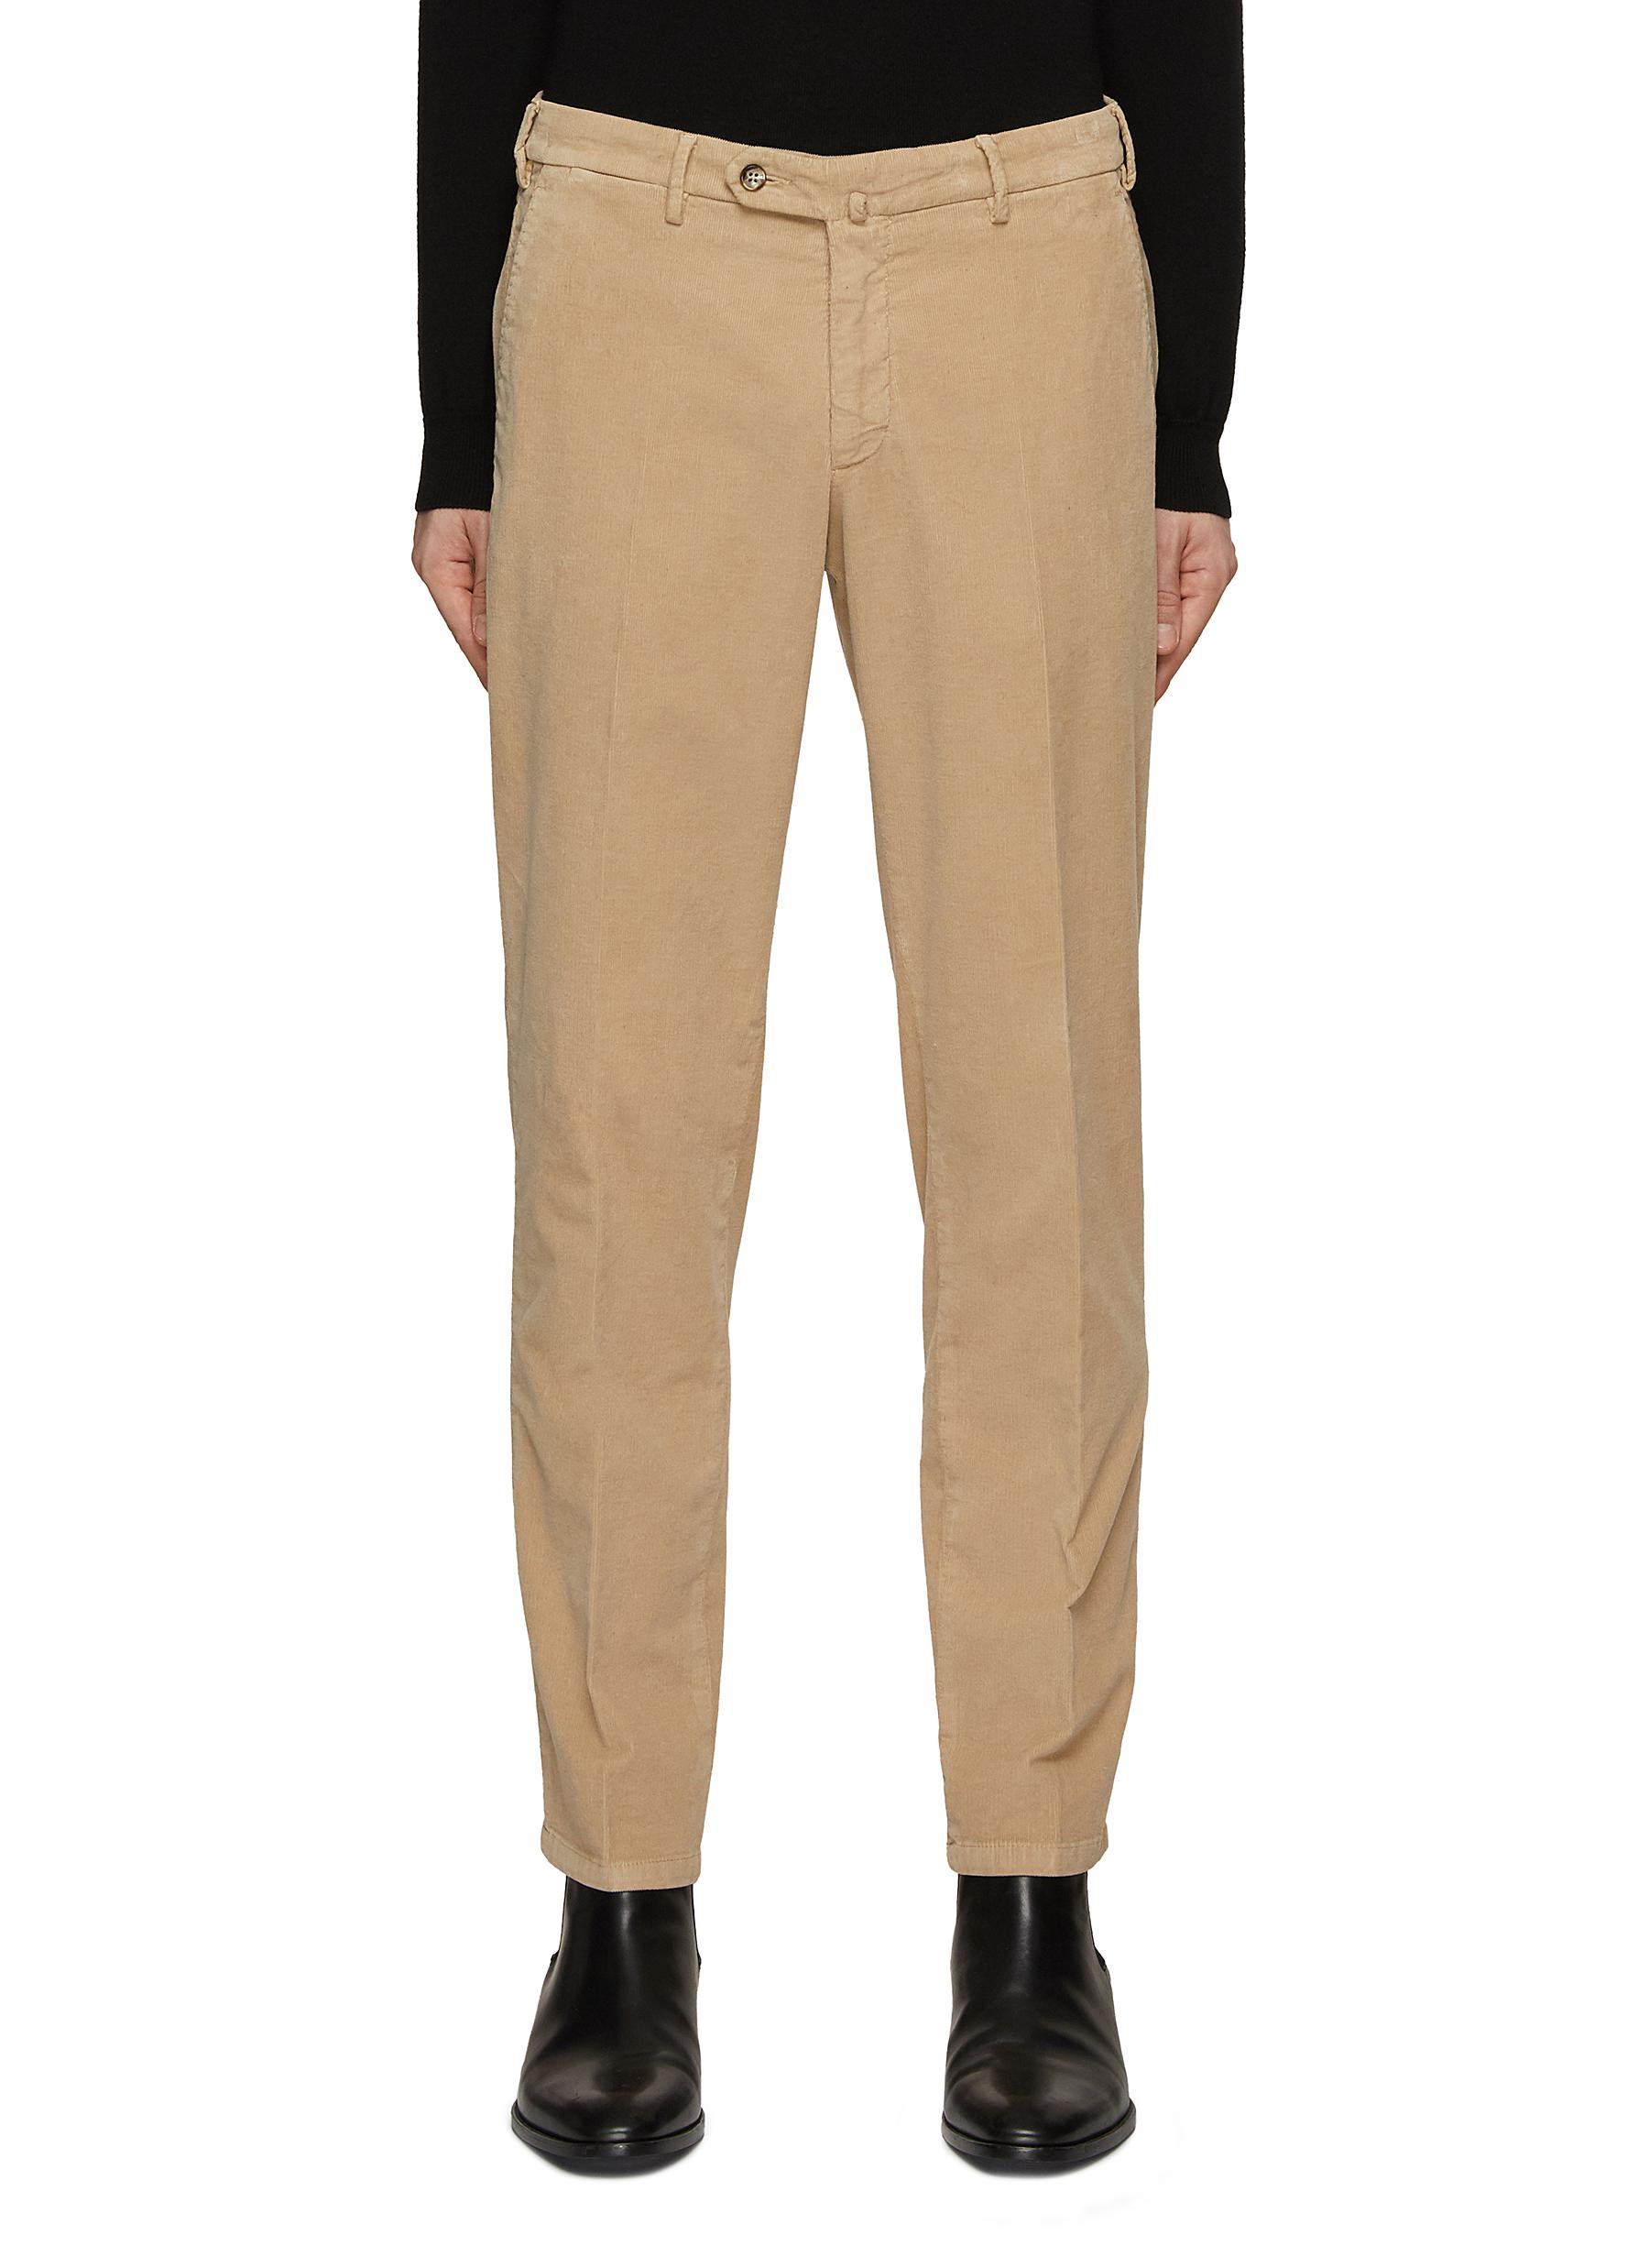 Buy Arrow Sports Mid Rise Flat Front Trousers - NNNOW.com